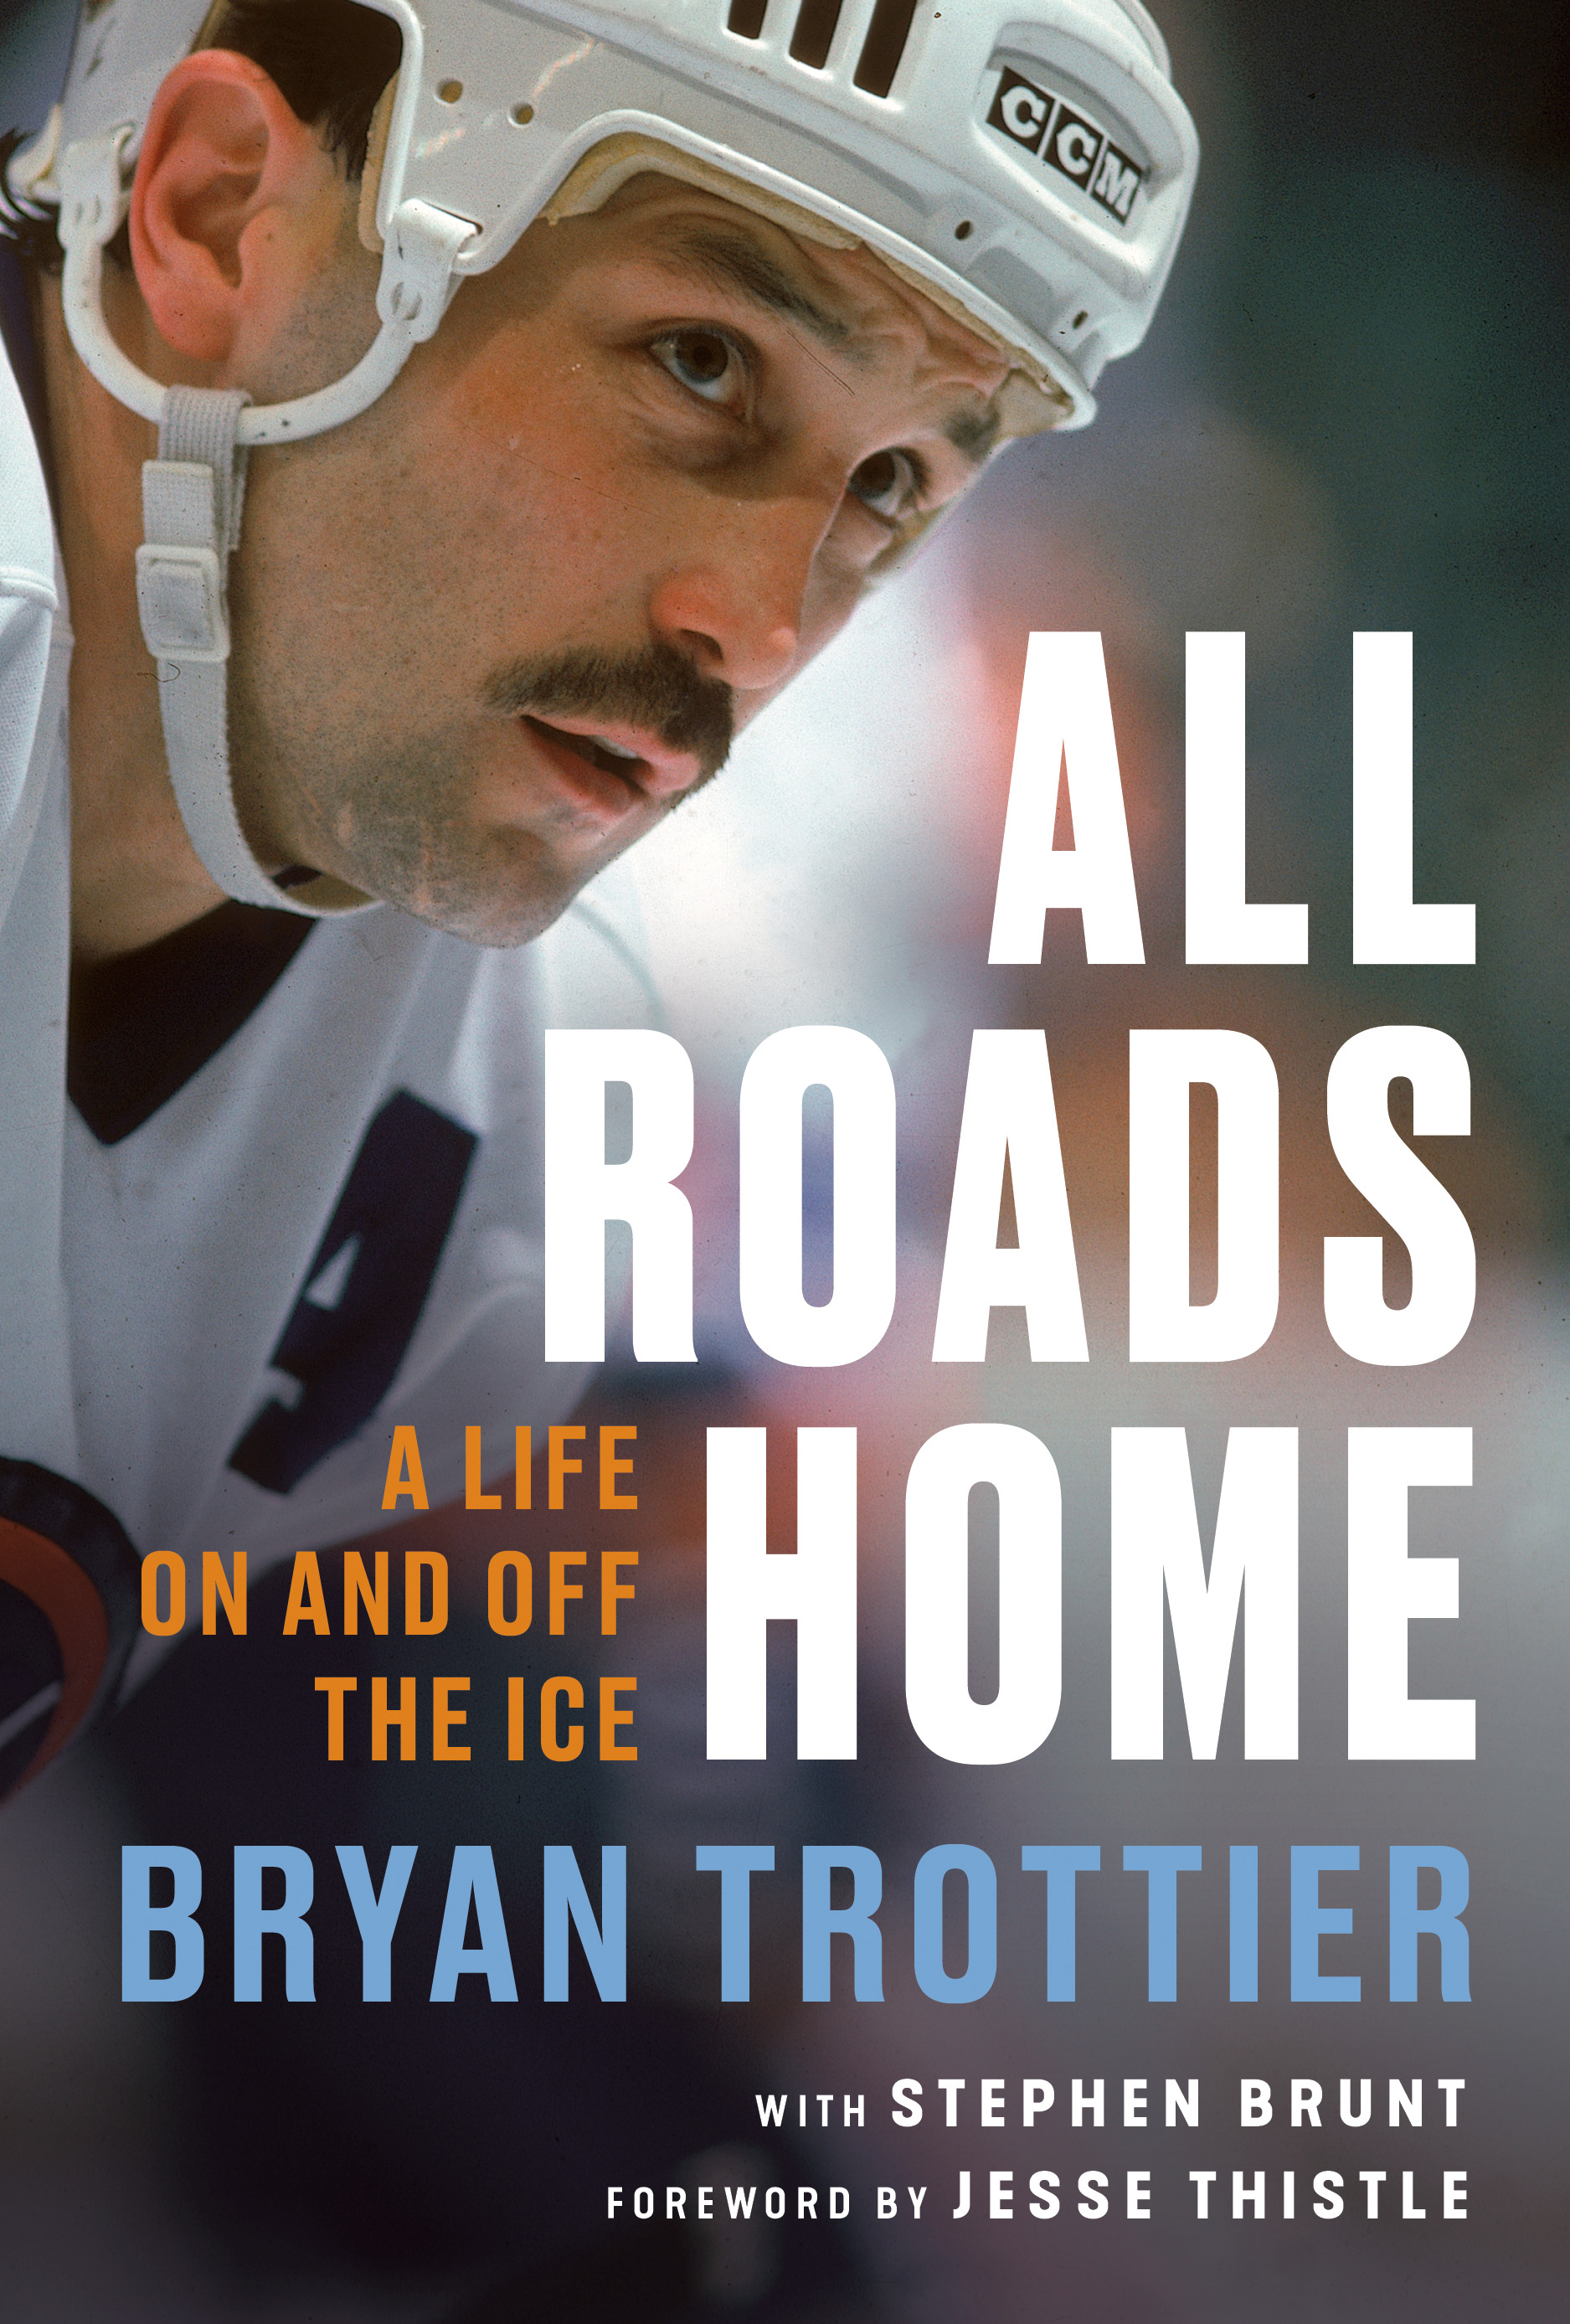 All Roads Home : A Life On and Off the Ice | Biography & Memoir